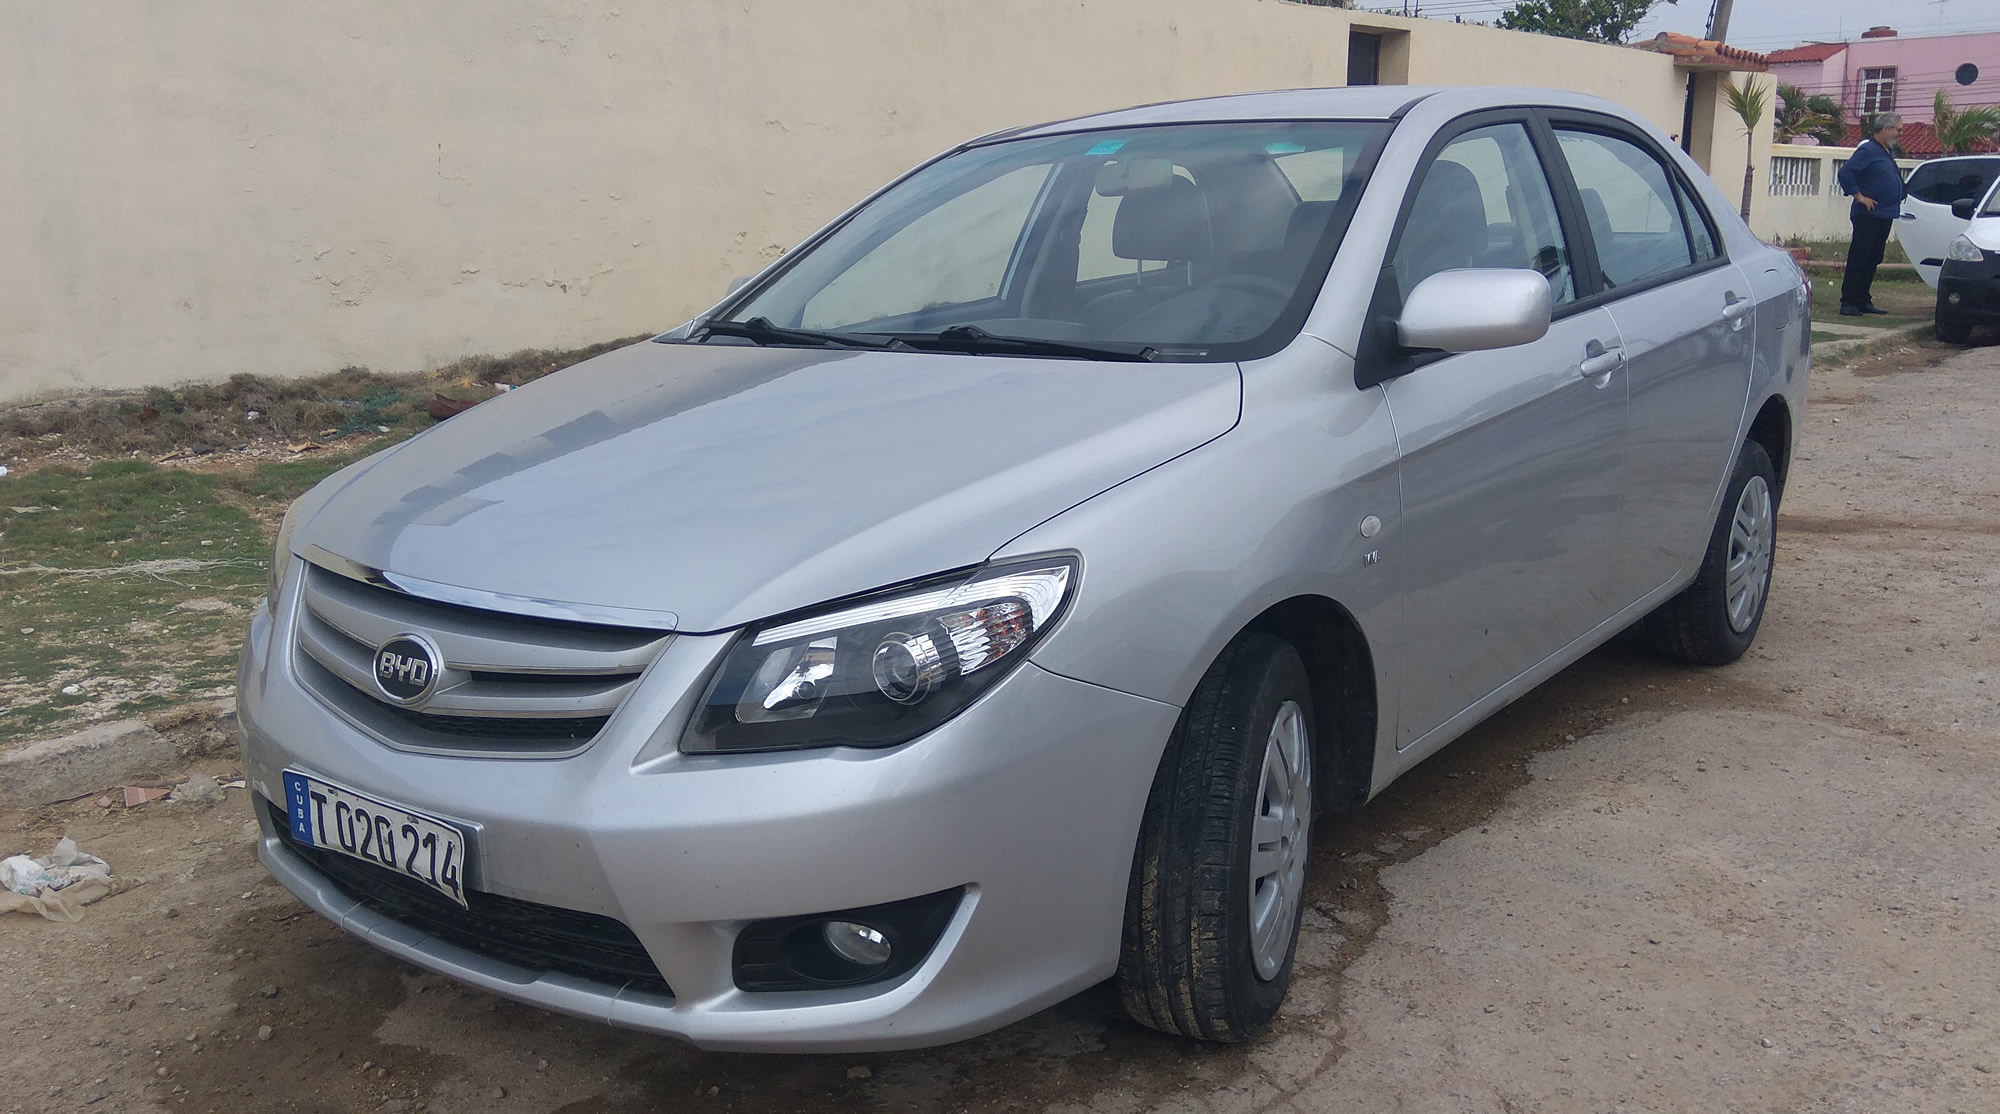 Voitures Chinoises à Cuba: BYD F3